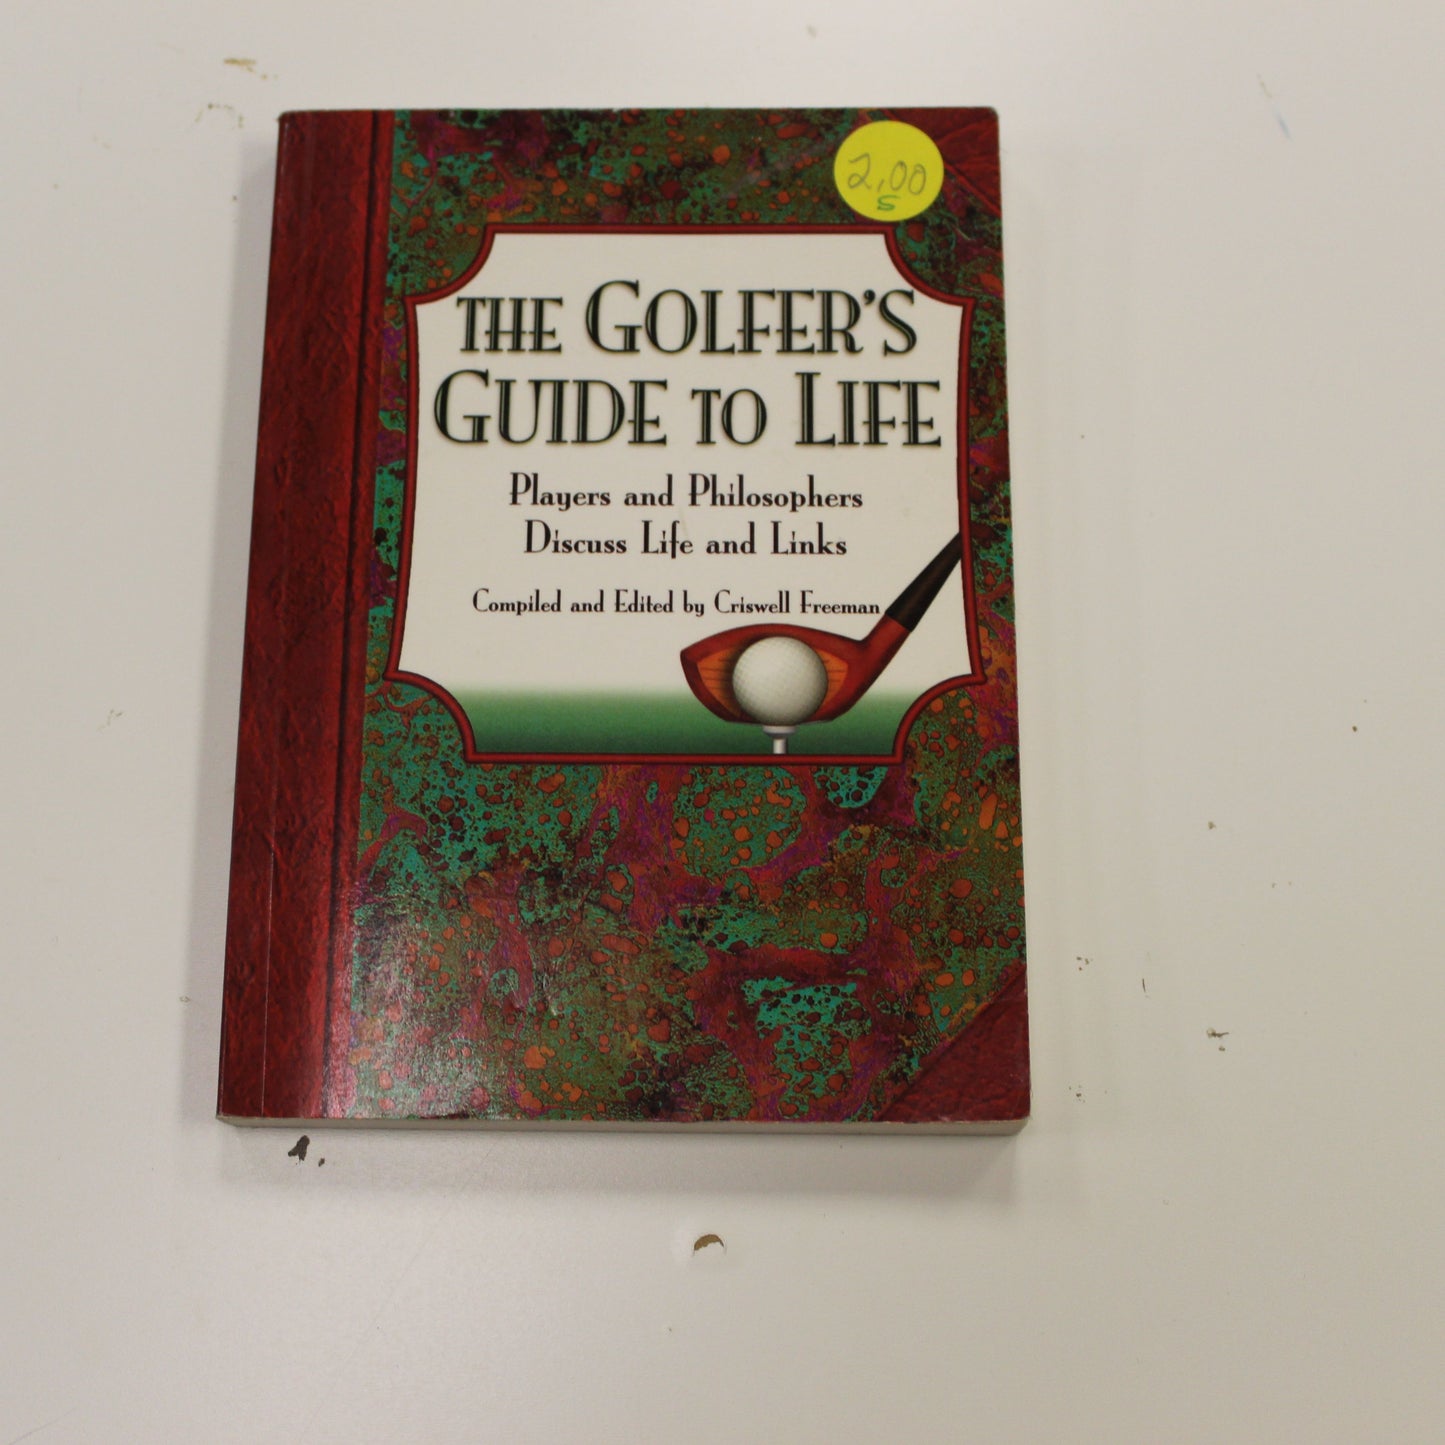 THE GOLFER'S GUIDE TO LIFE